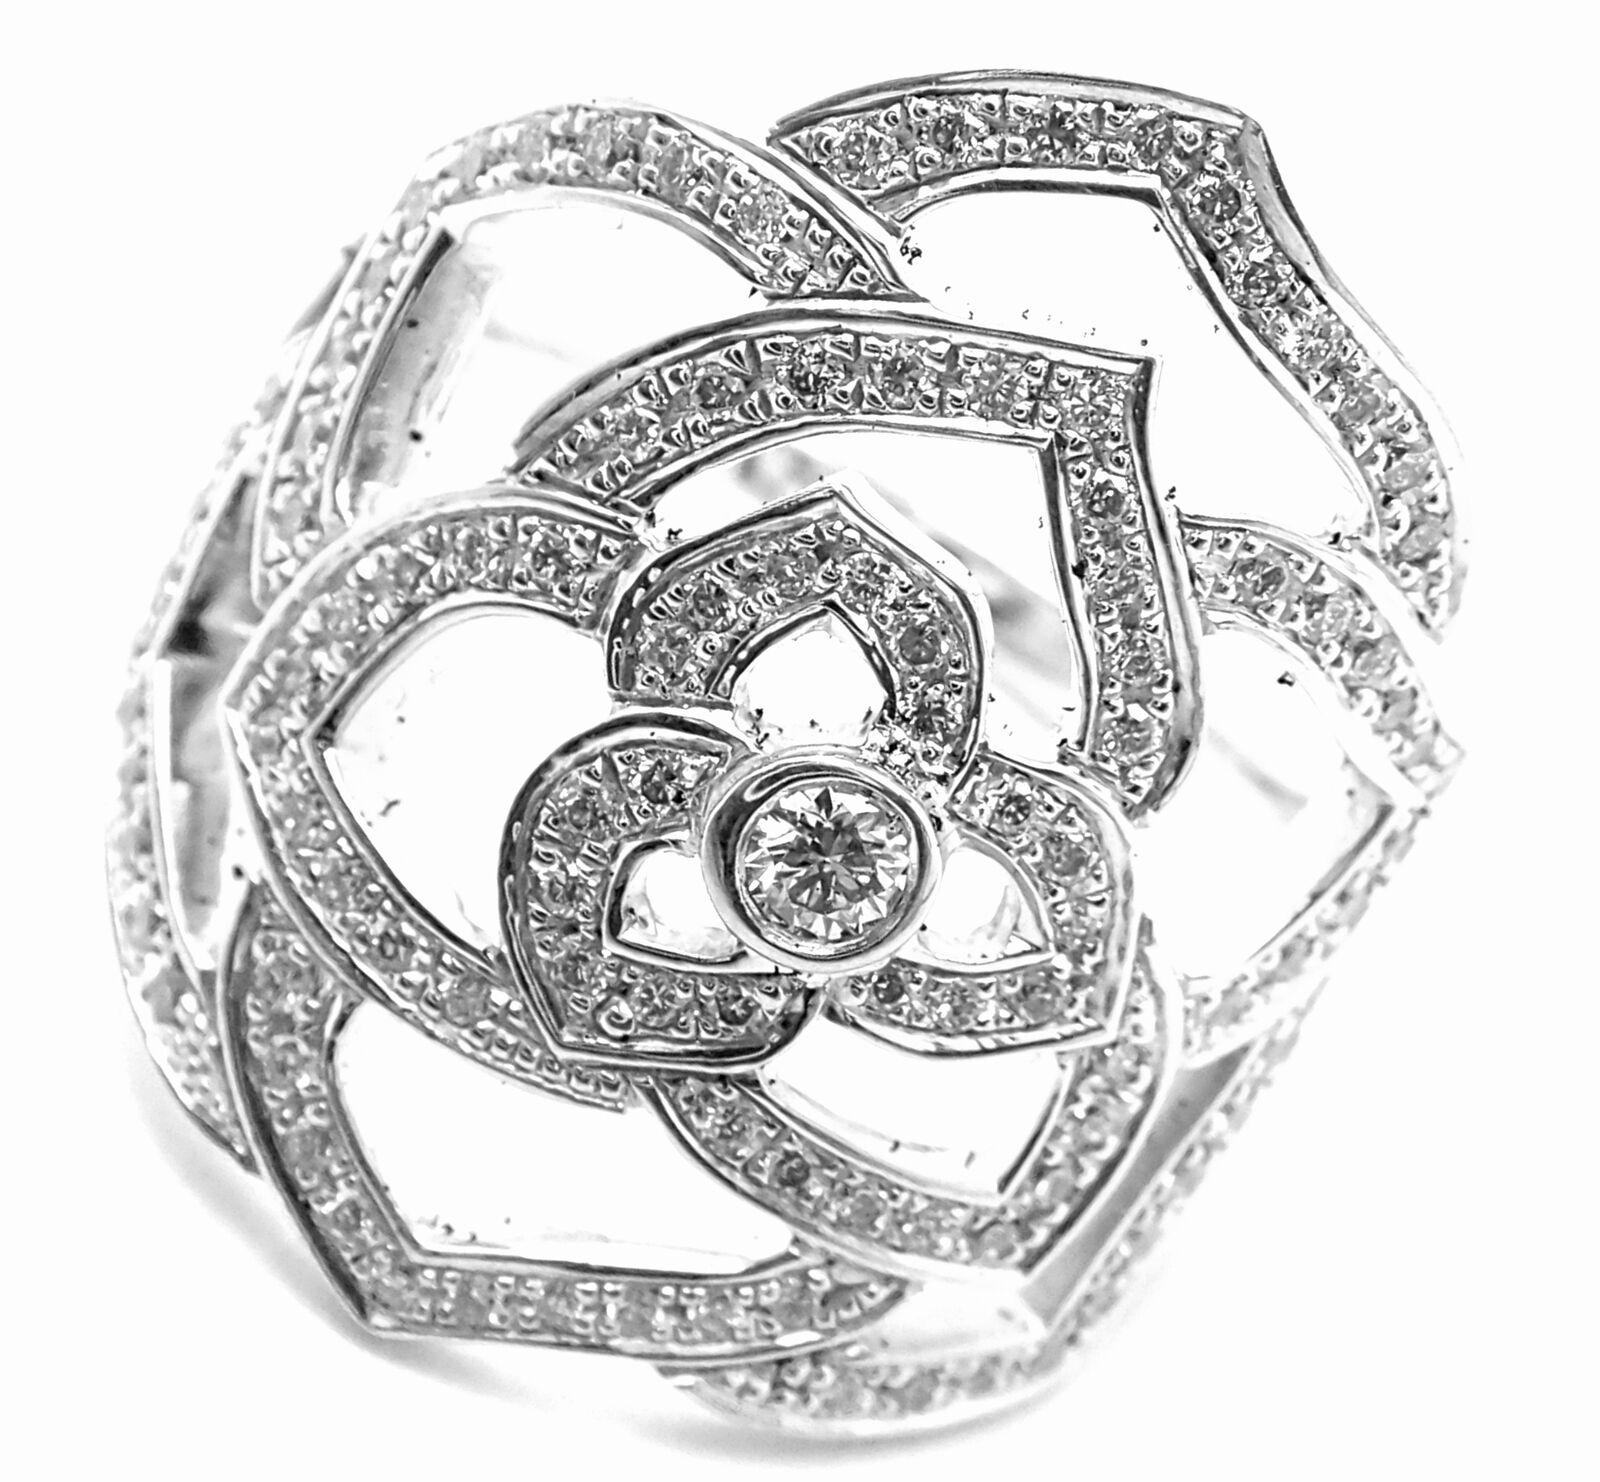 18k White Gold Diamond Rose Flower Ring by Piaget. 
With 89 Round brilliant cut diamonds VS1 clarity, G color total weight approximately .45ct
This ring comes with Piaget box.
Details: 
Ring Size: European 52, US 6
Weight: 5.9 grams
Width: